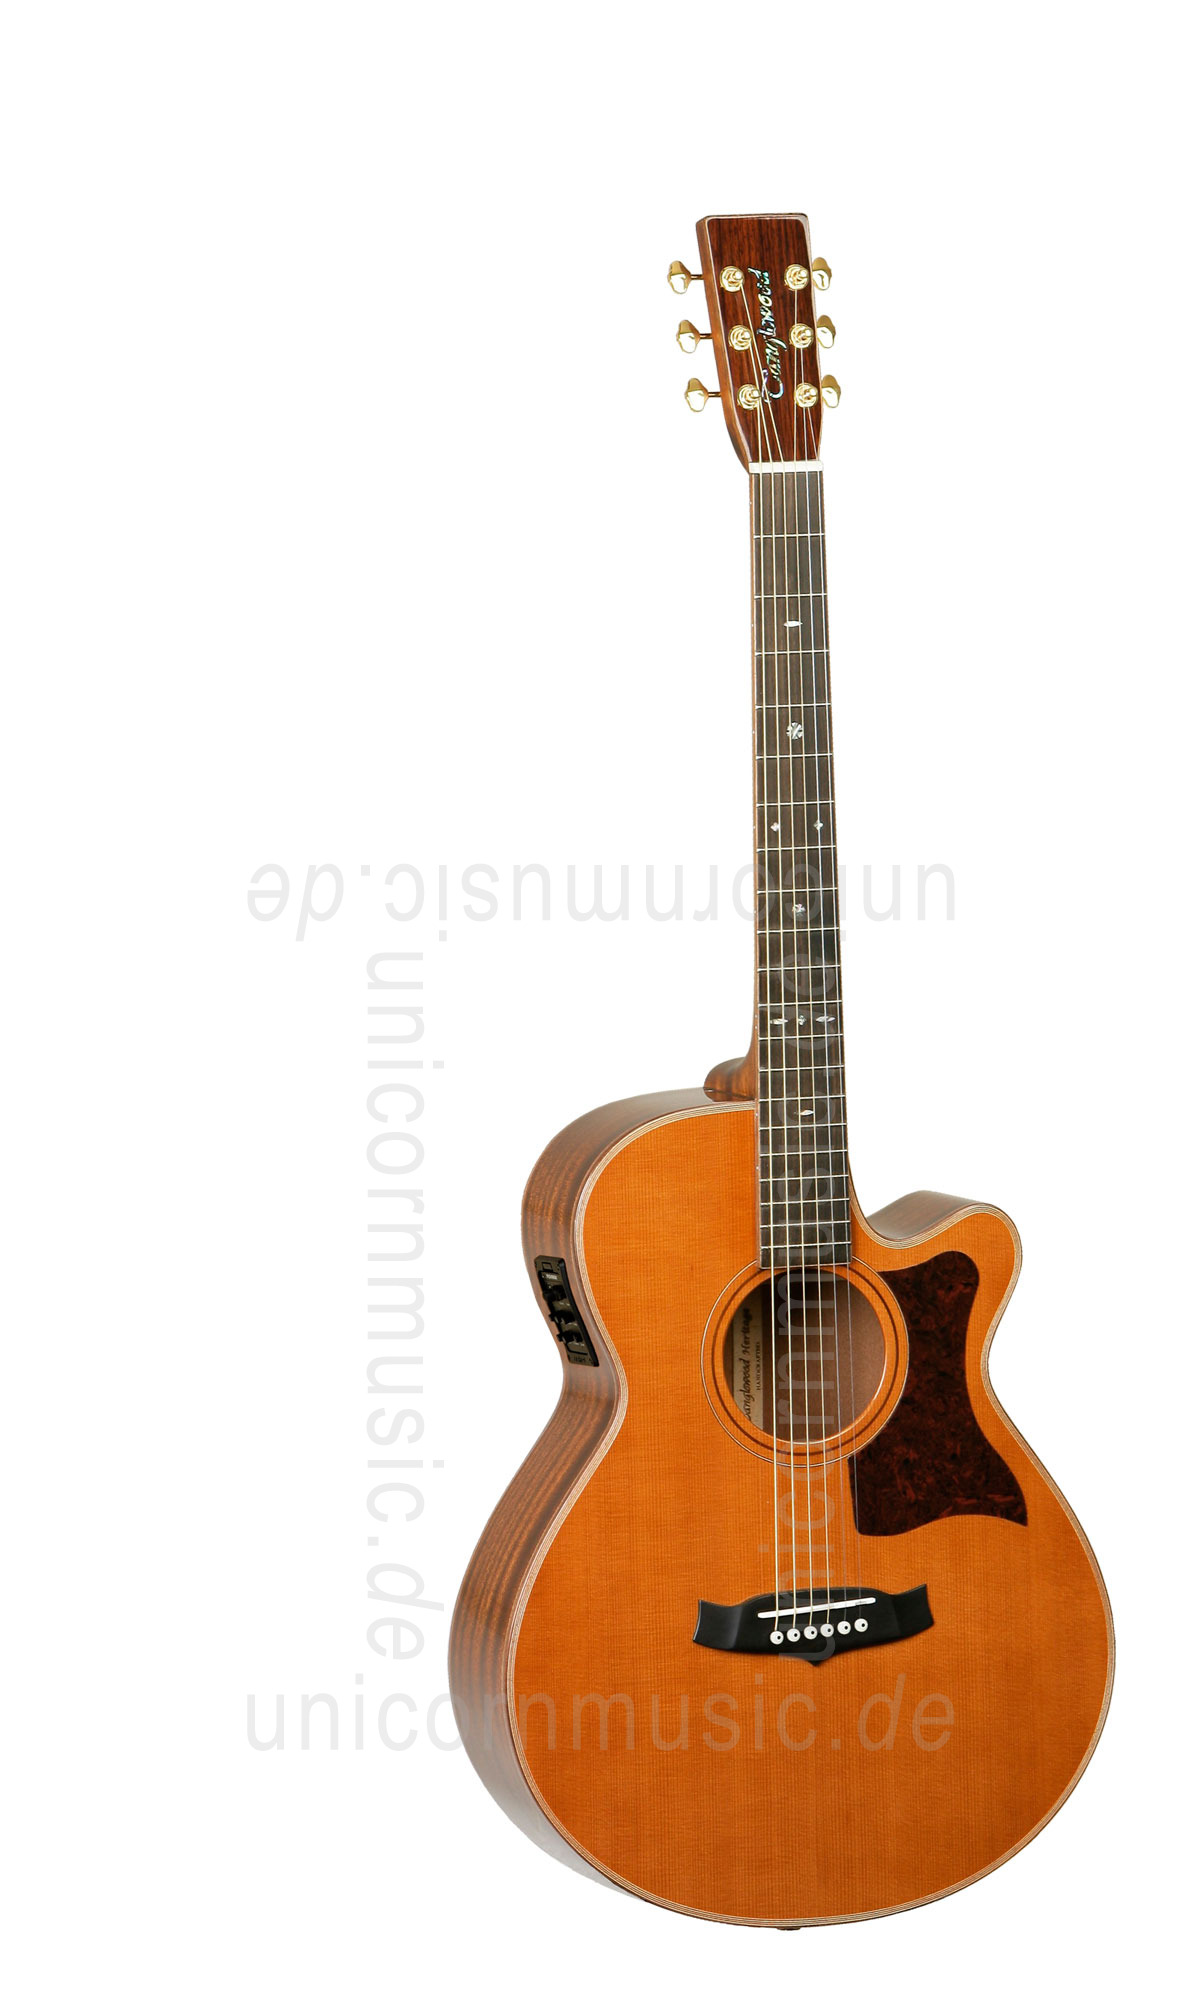 to article description / price Acoustic Guitar TANGLEWOOD TW45/H SR E - Heritage Series - Super Folk - Fishman Presys Blend - Cutaway - all solid